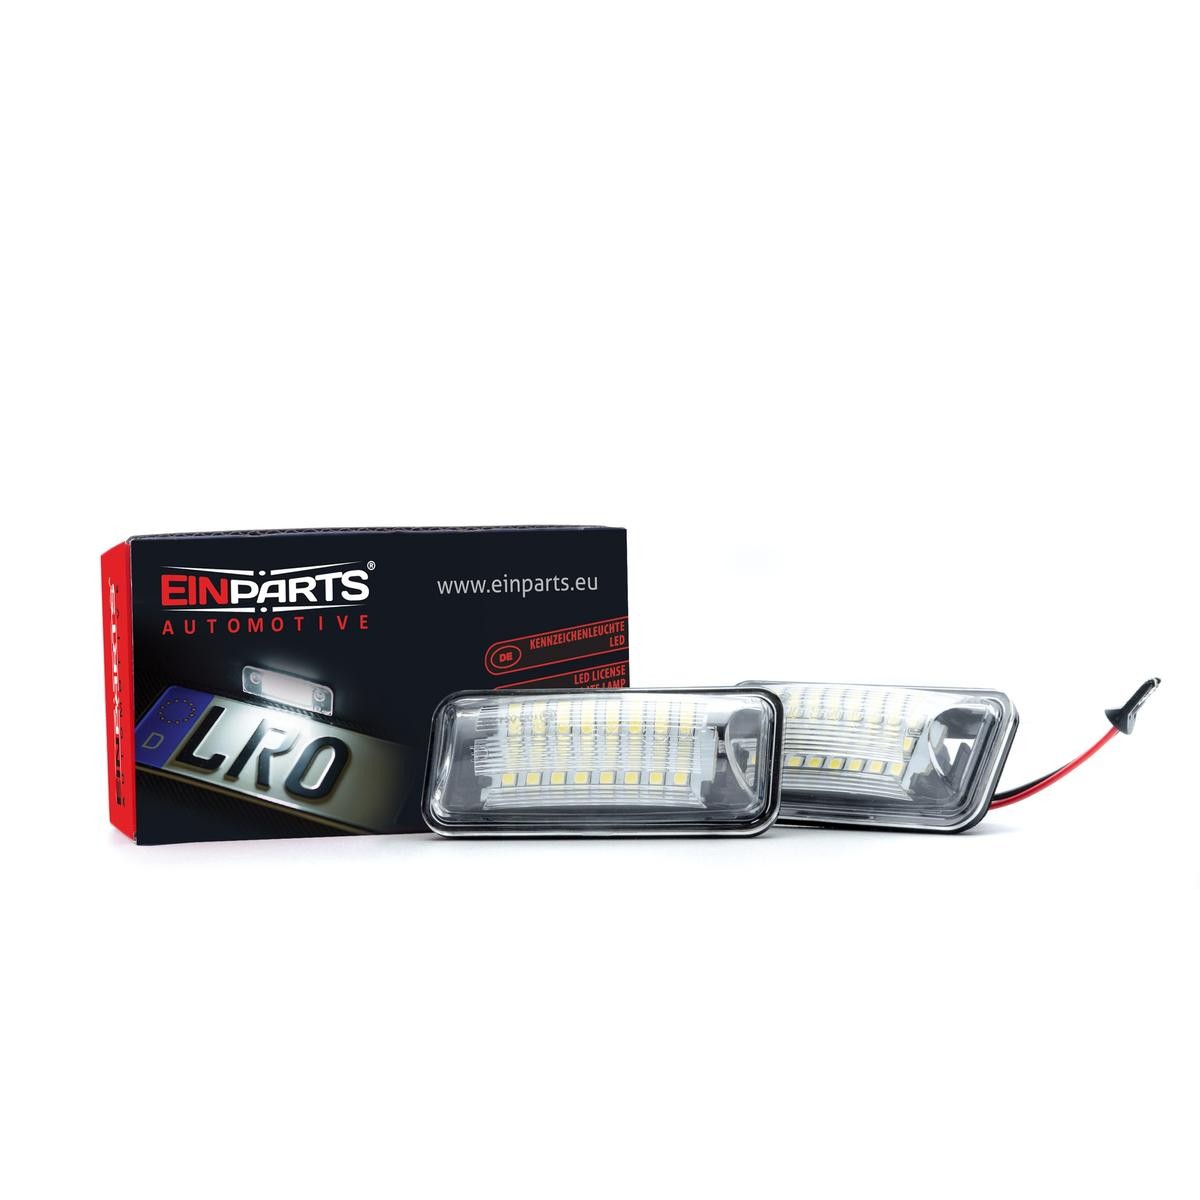 Toyota YARIS Number plate light 20799355 EINPARTS EP40 online buy